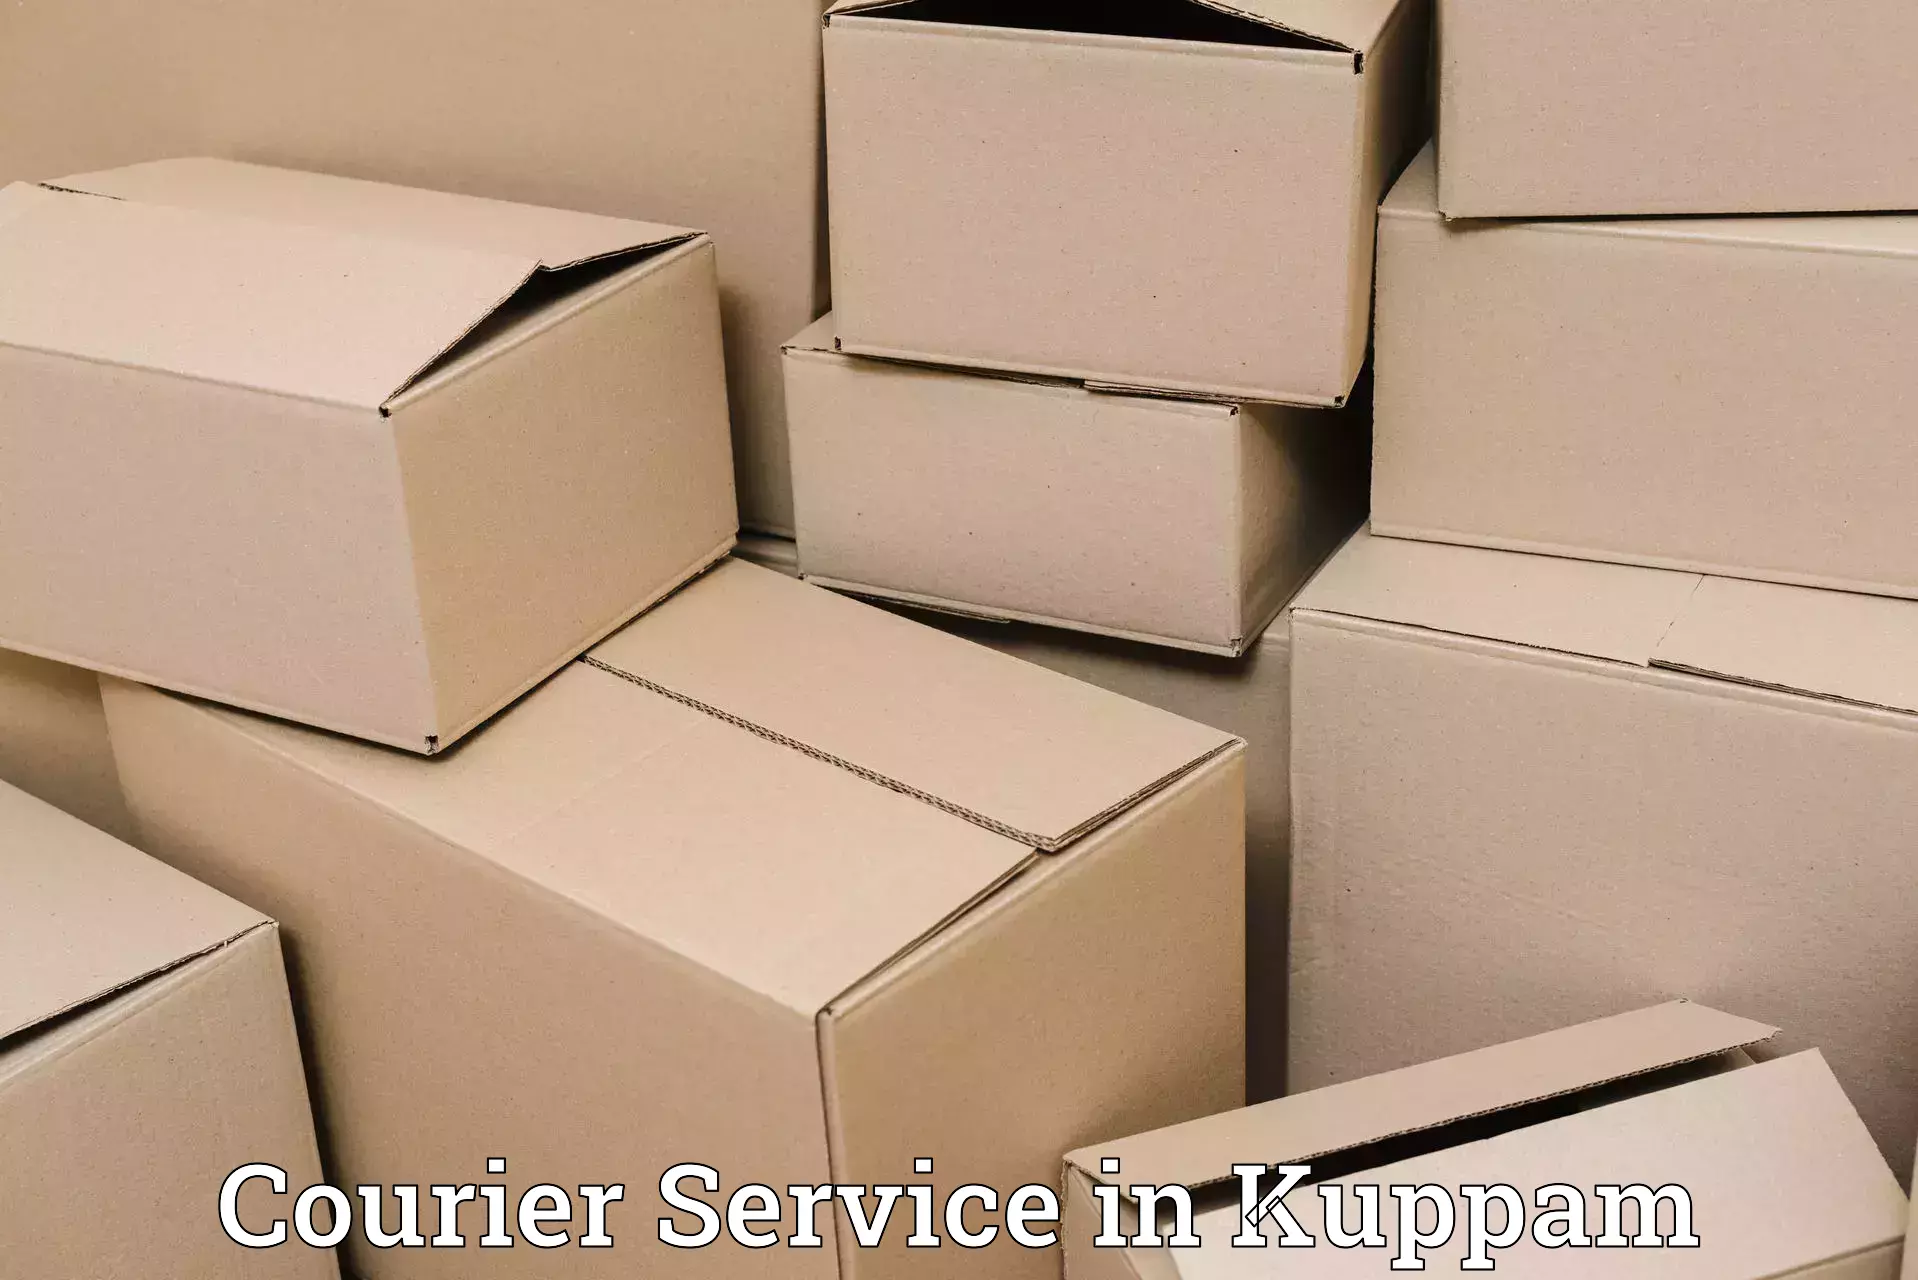 Parcel service for businesses in Kuppam